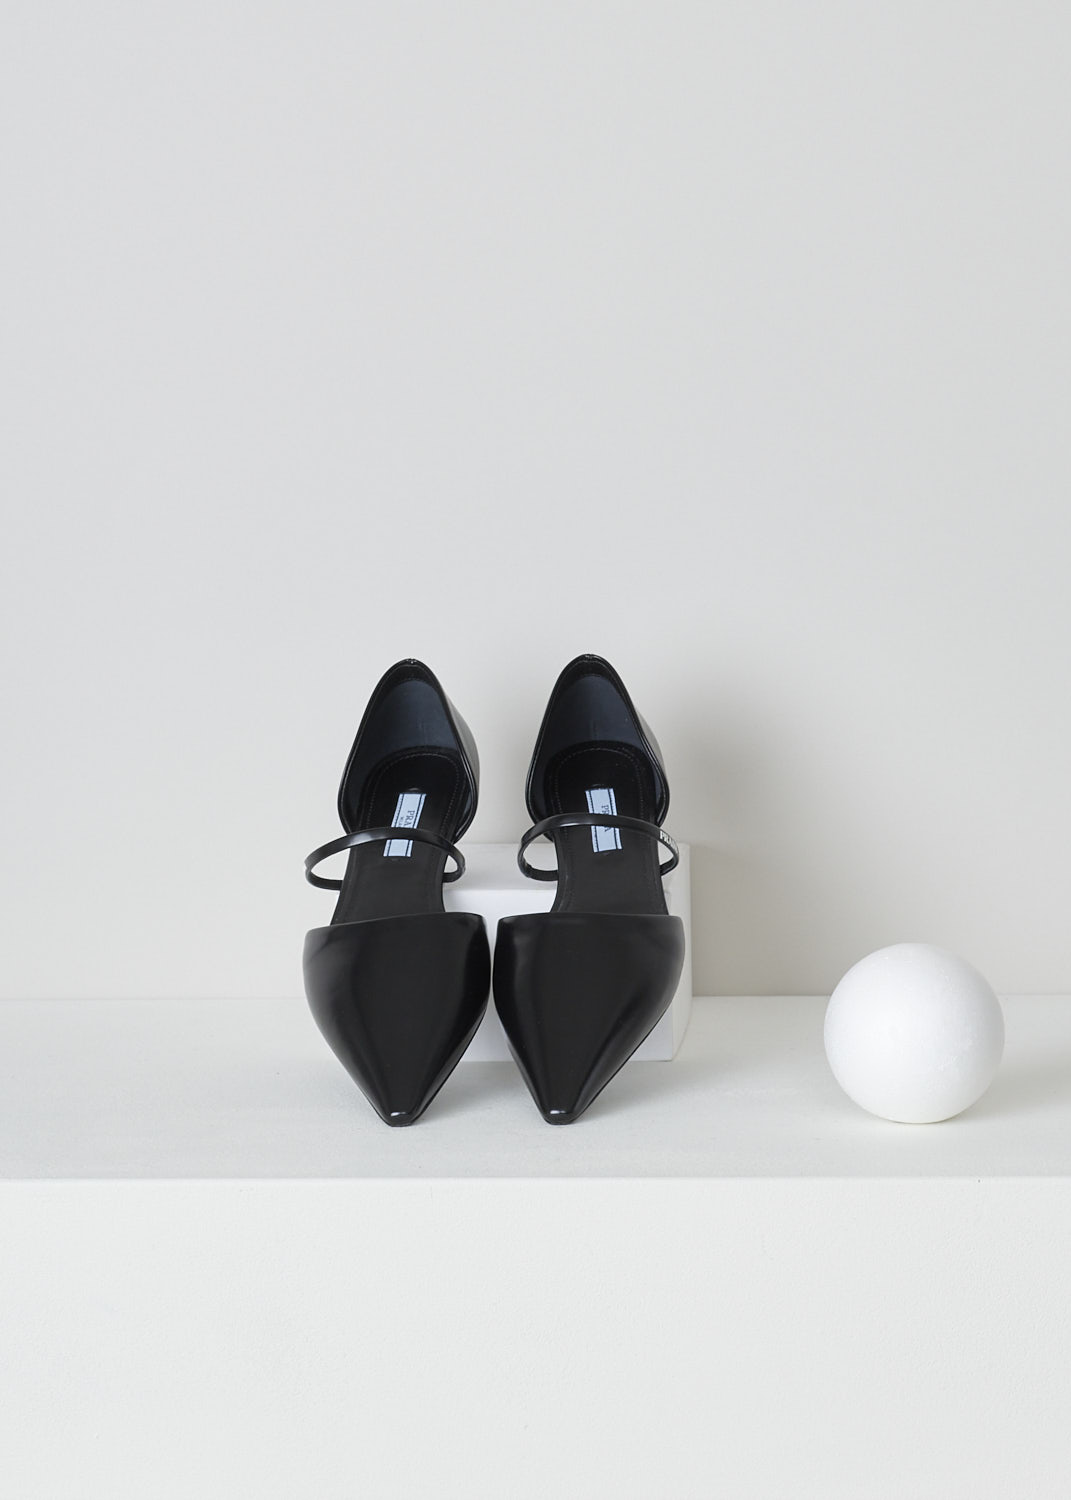 PRADA, POINTED BLACK BALLERINA FLATS, 1F519M_055_F0002_NERO, Black, Top, These black leather slip-on ballerina flats have a pointed toe and a decorative strap across the vamp with the band's logo in white. These ballerina flats have a small heel. 

